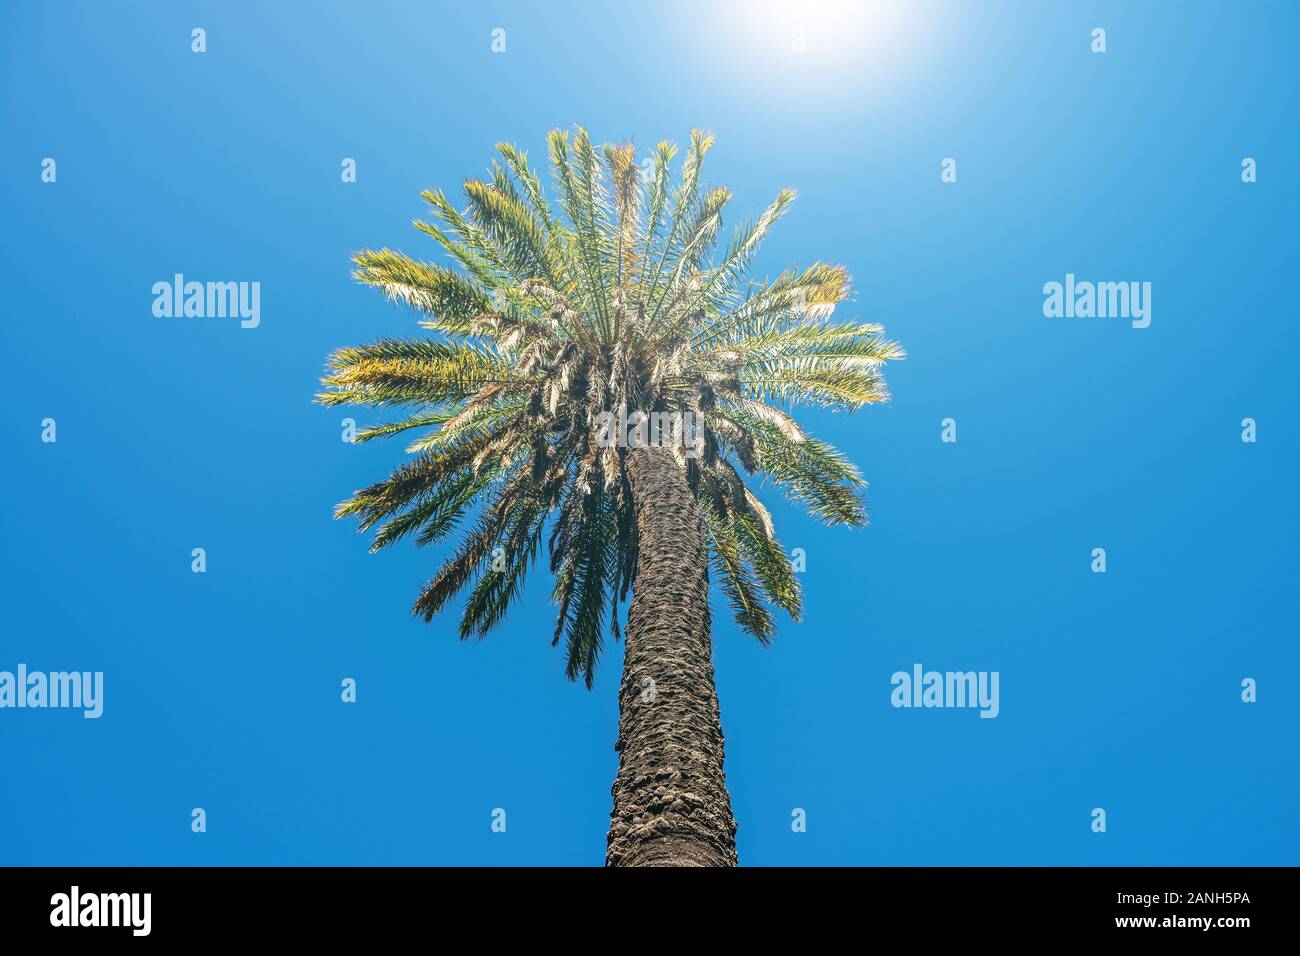 Tall palm tree against bright sun and blue sky Stock Photo